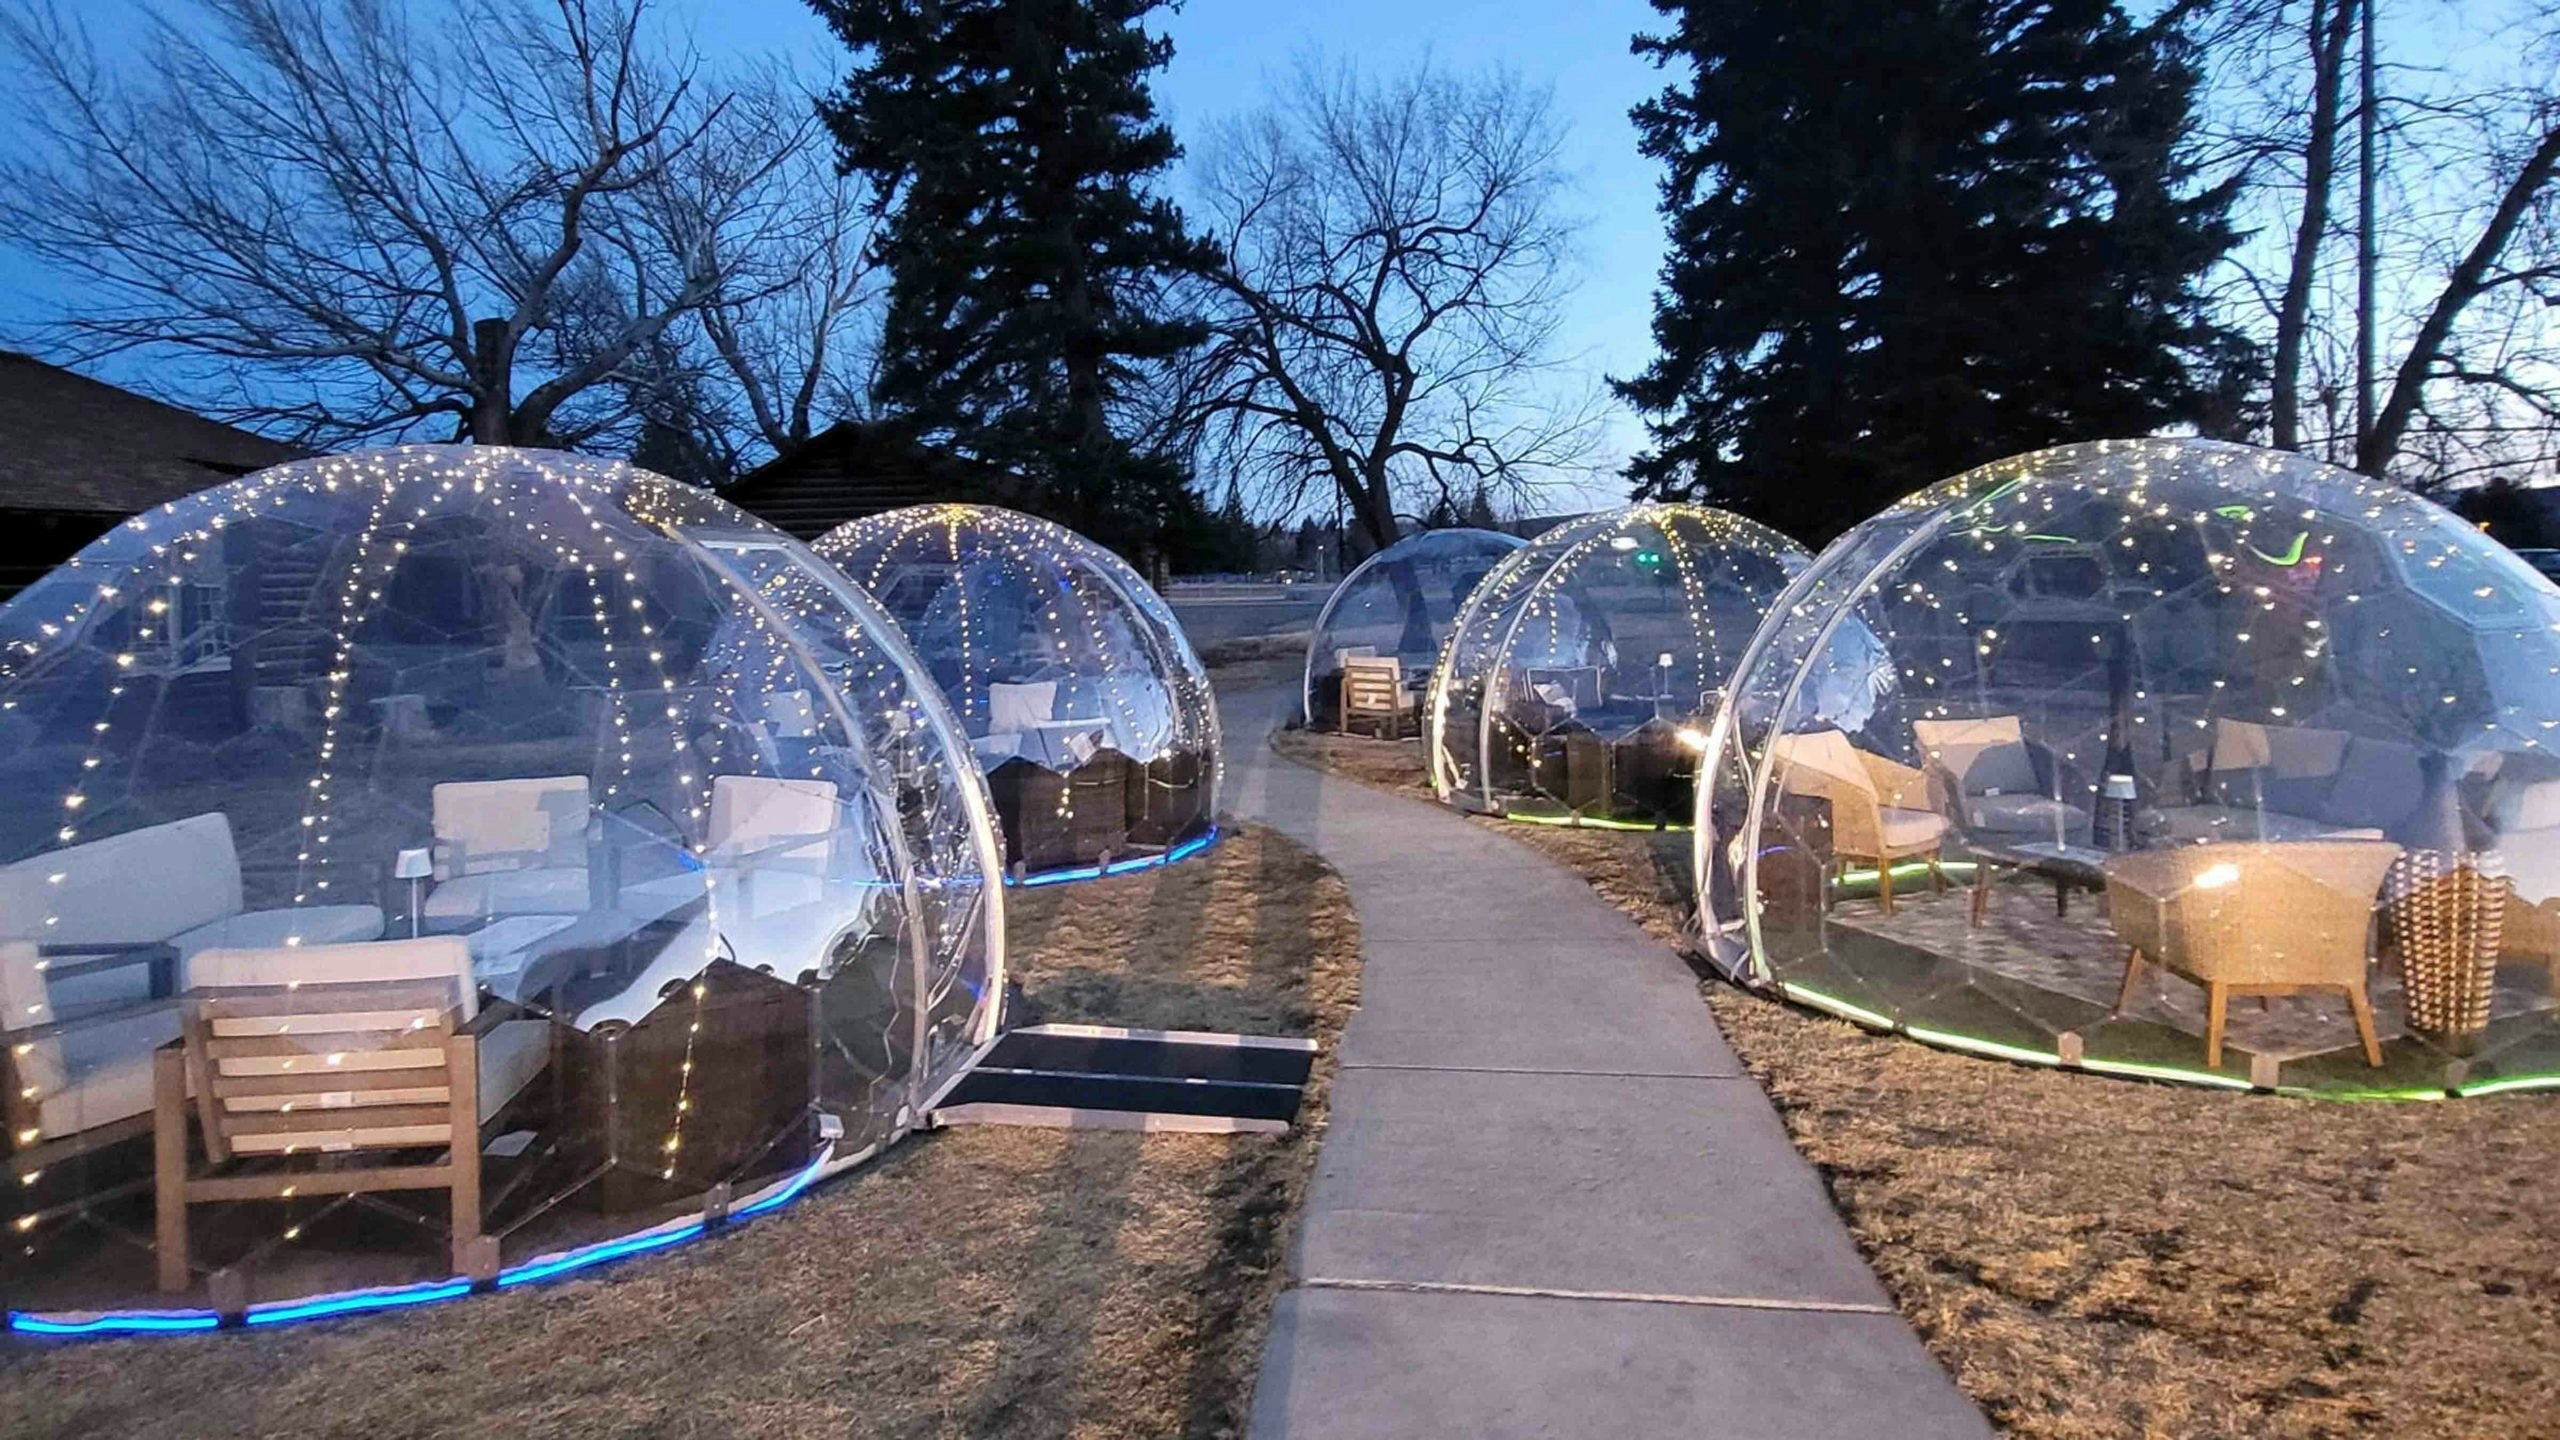 Outdoor domes 3 16 22 scaled